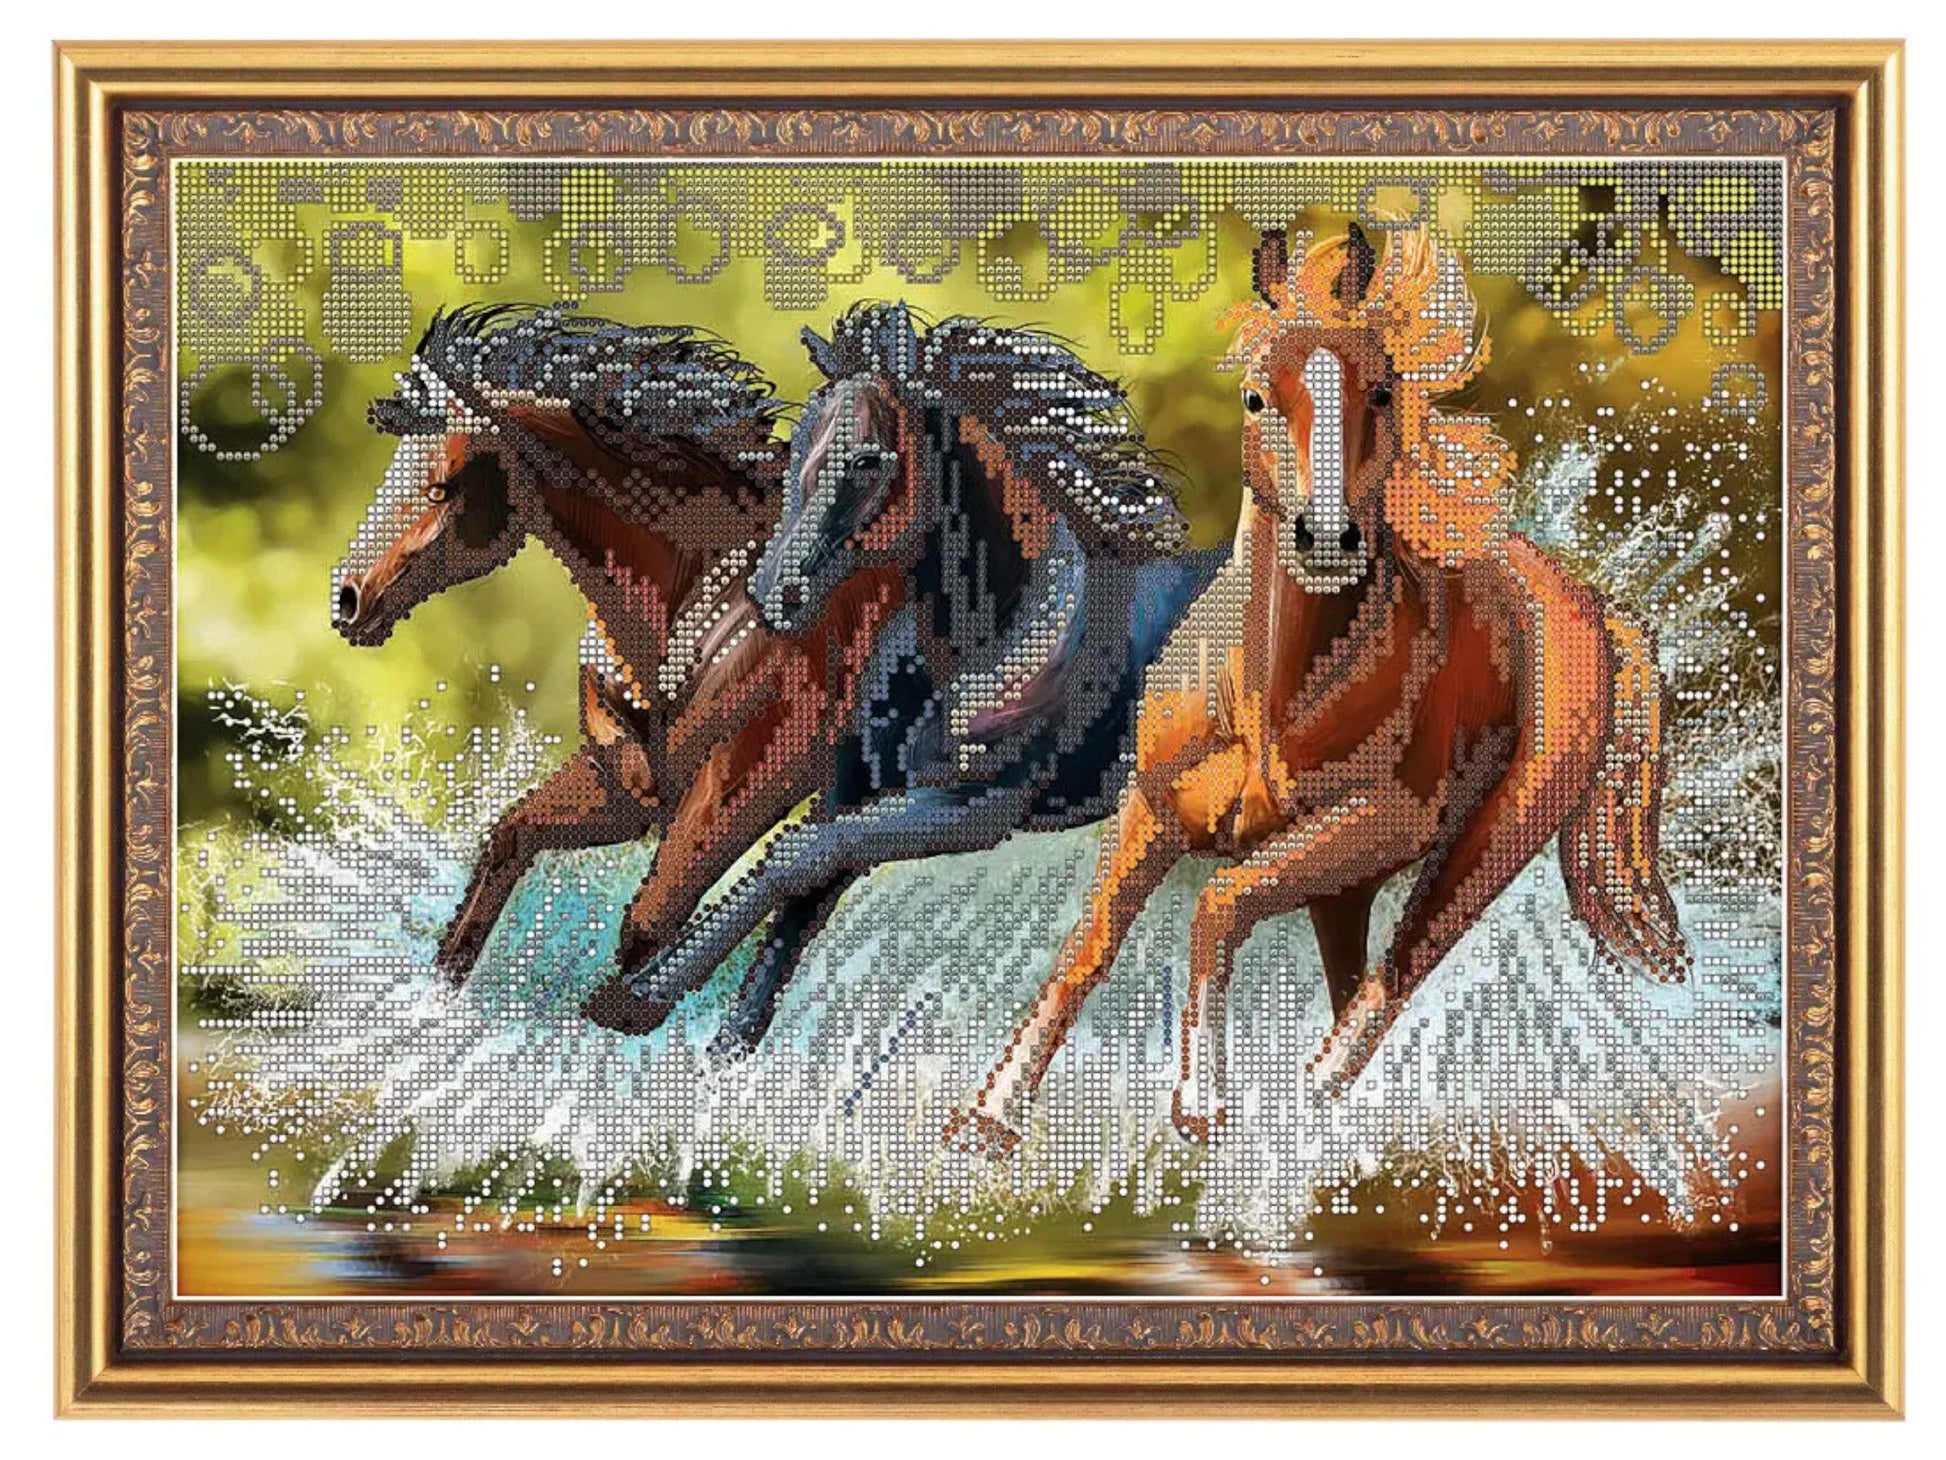 Stunning DIY Bead Embroidery Kit - Horses Mustangs Design Size: 13.4-11.0 in (34.5-28.5cm) - VadymShop